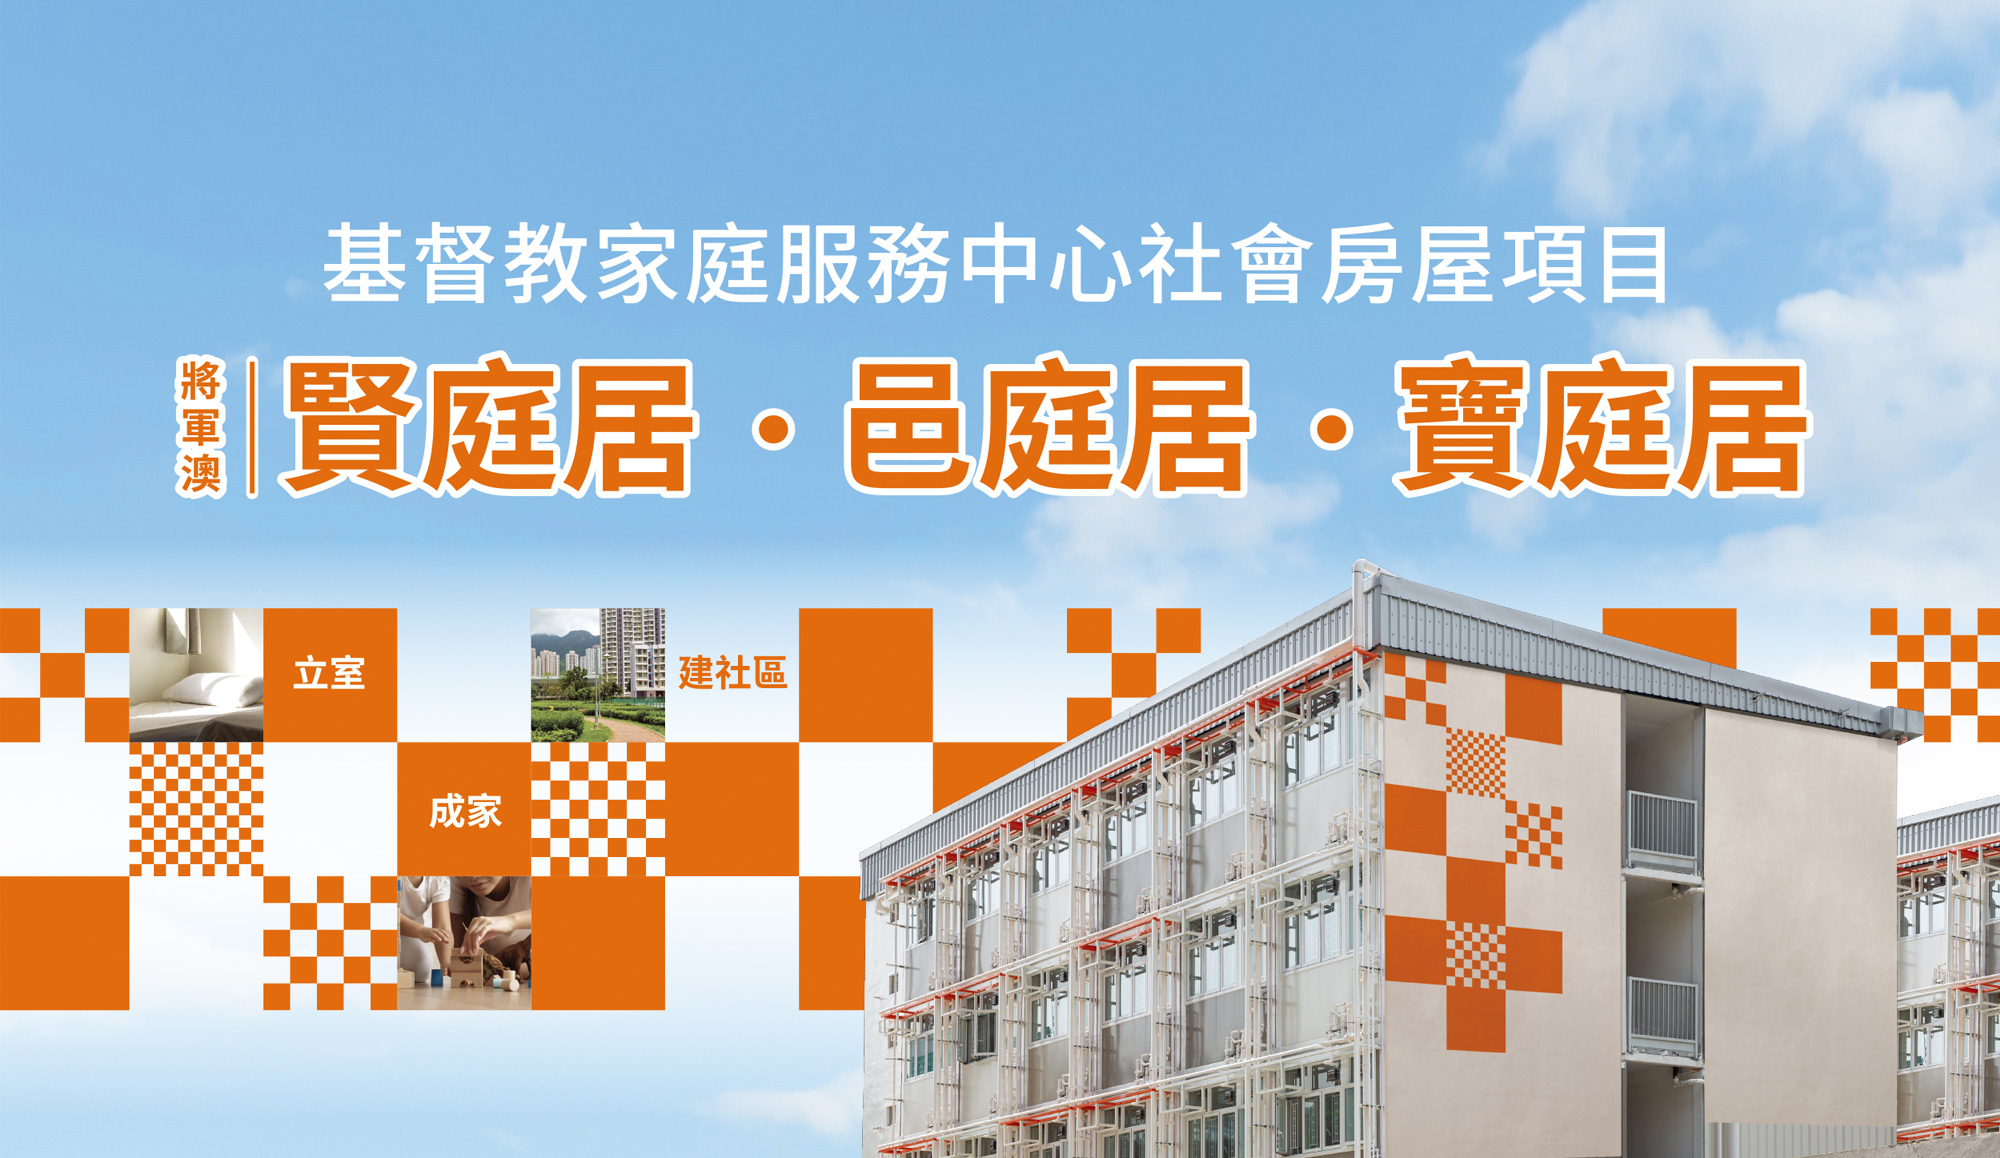 Cover Image - Social Housing Project - Po Lam Road North “Po Ting Terraced Home”,  Tong Yin Street “Yin Ting Terraced Home” & Po Yap Road “Yap Ting Terraced Home”in Tseung Kwan O